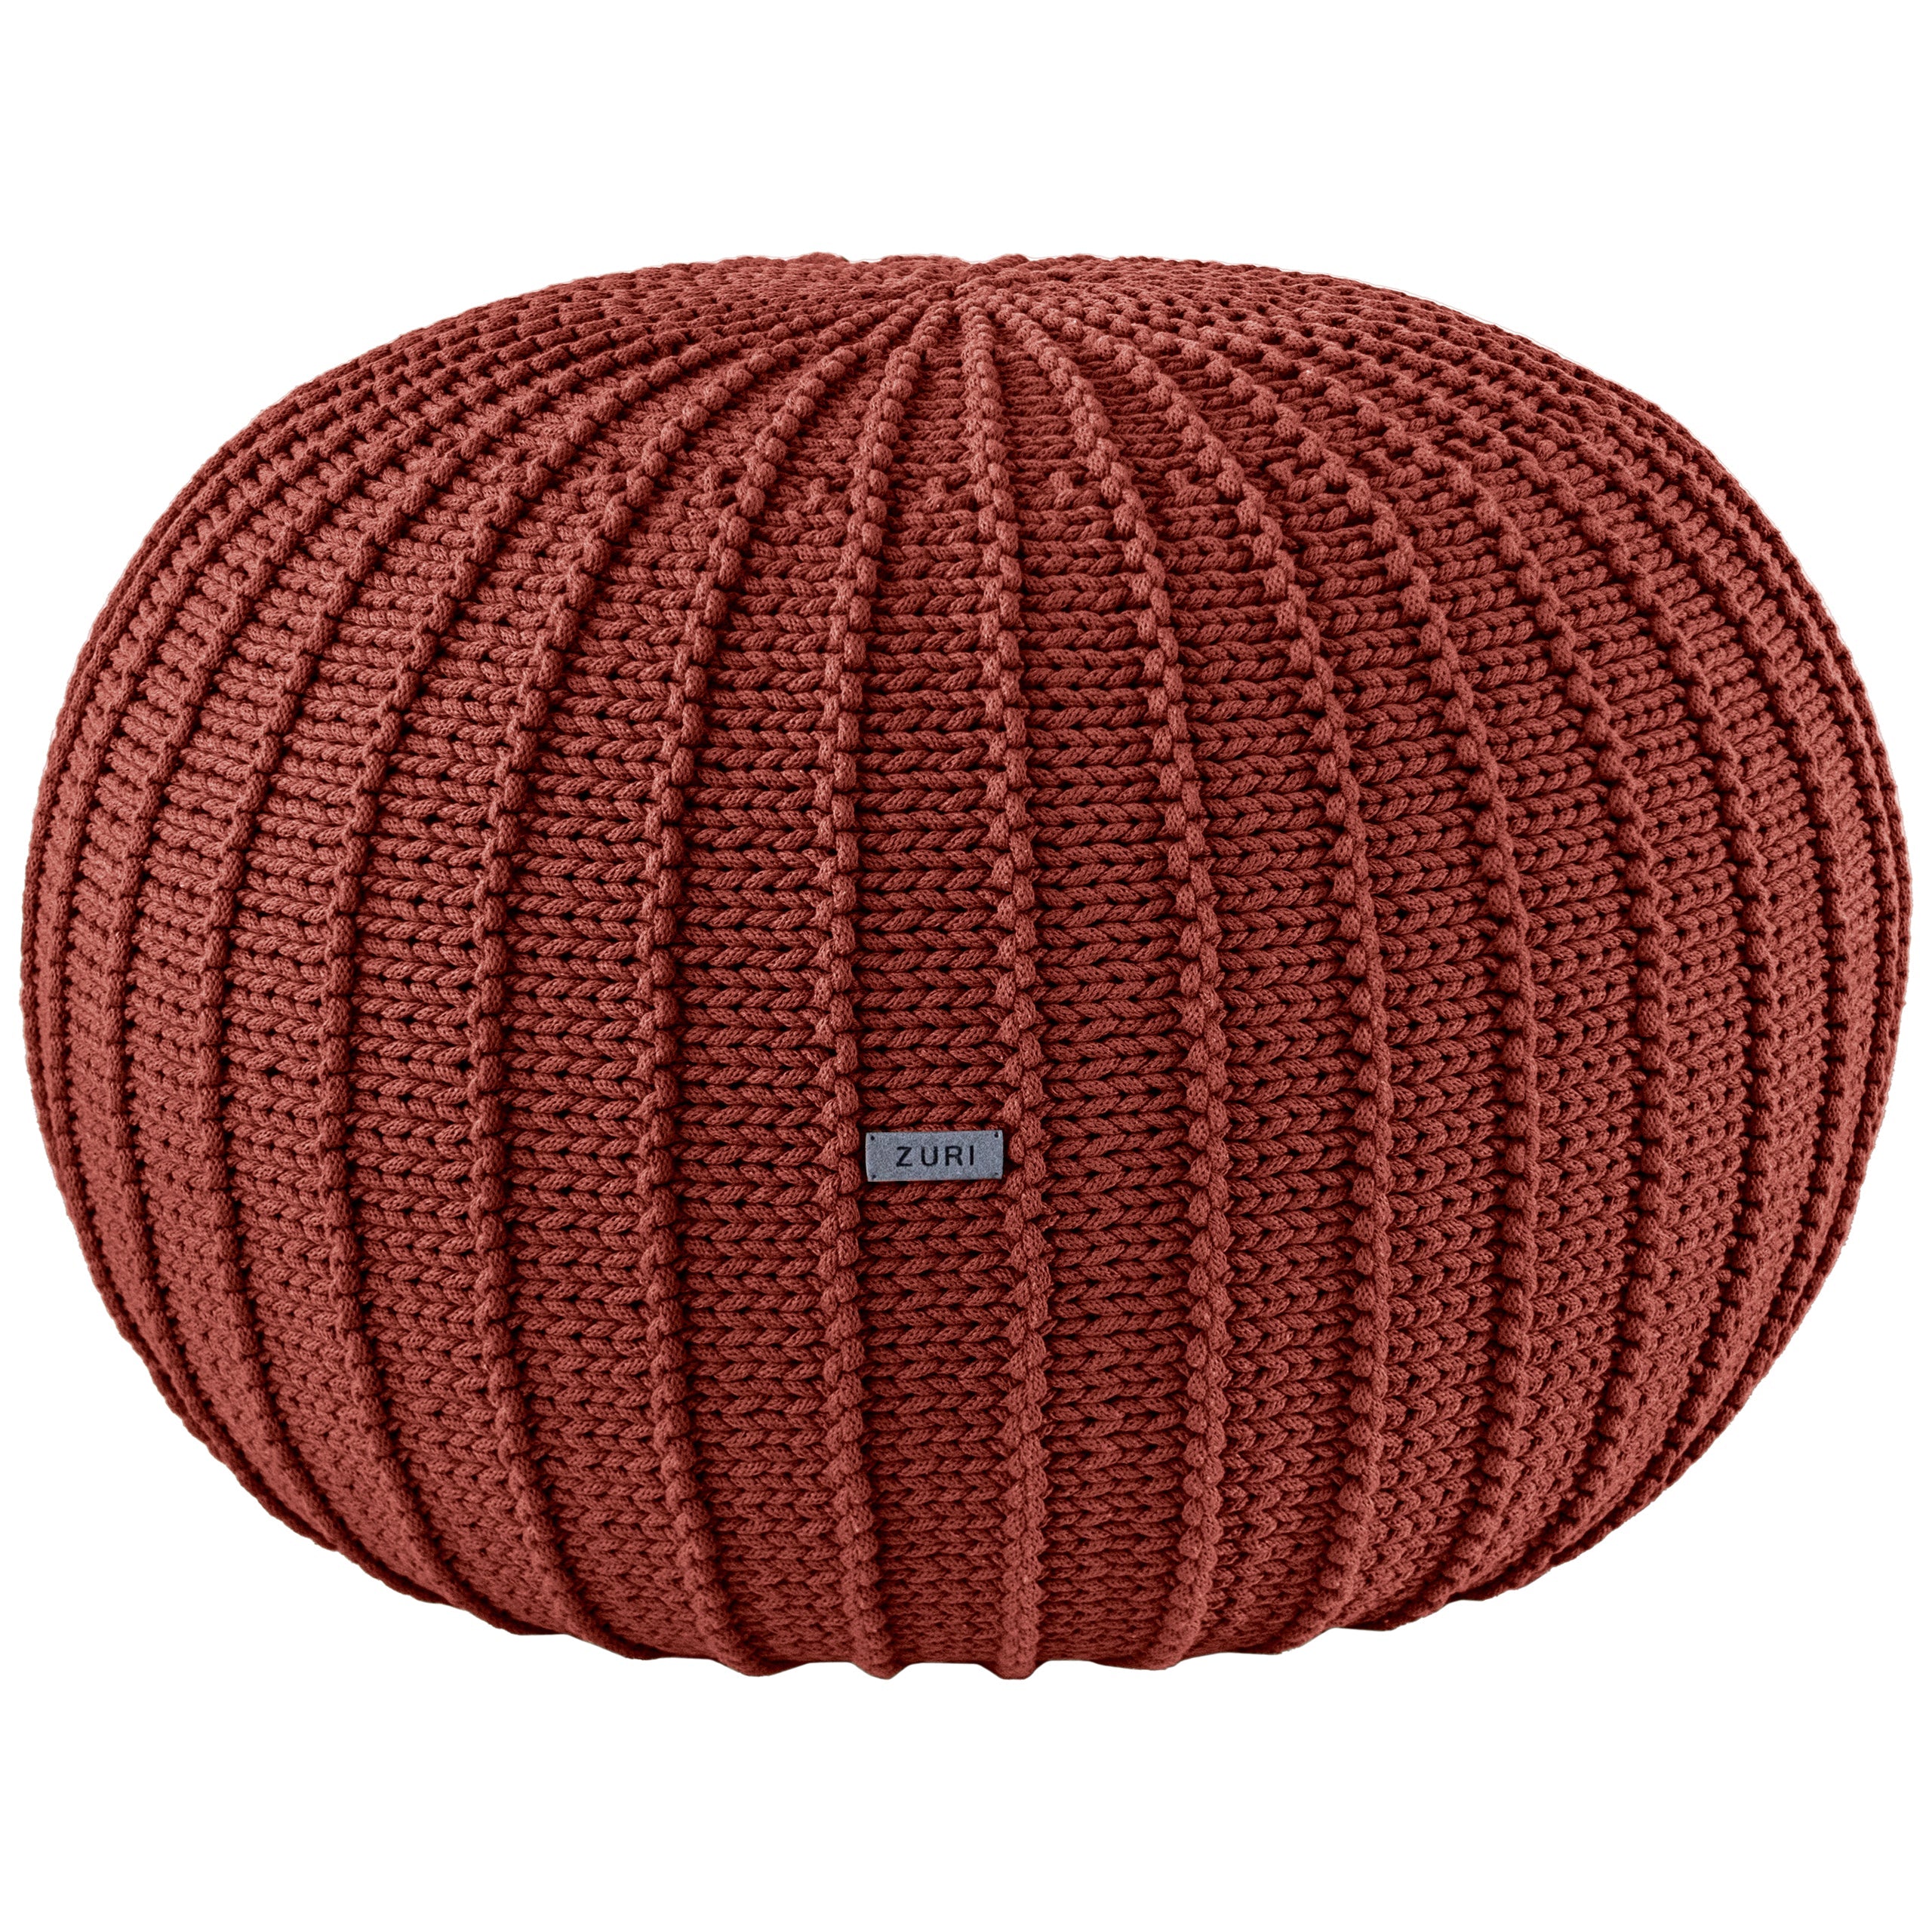 Zuri House Knitted Pouffe, Large | TERRACOTTA